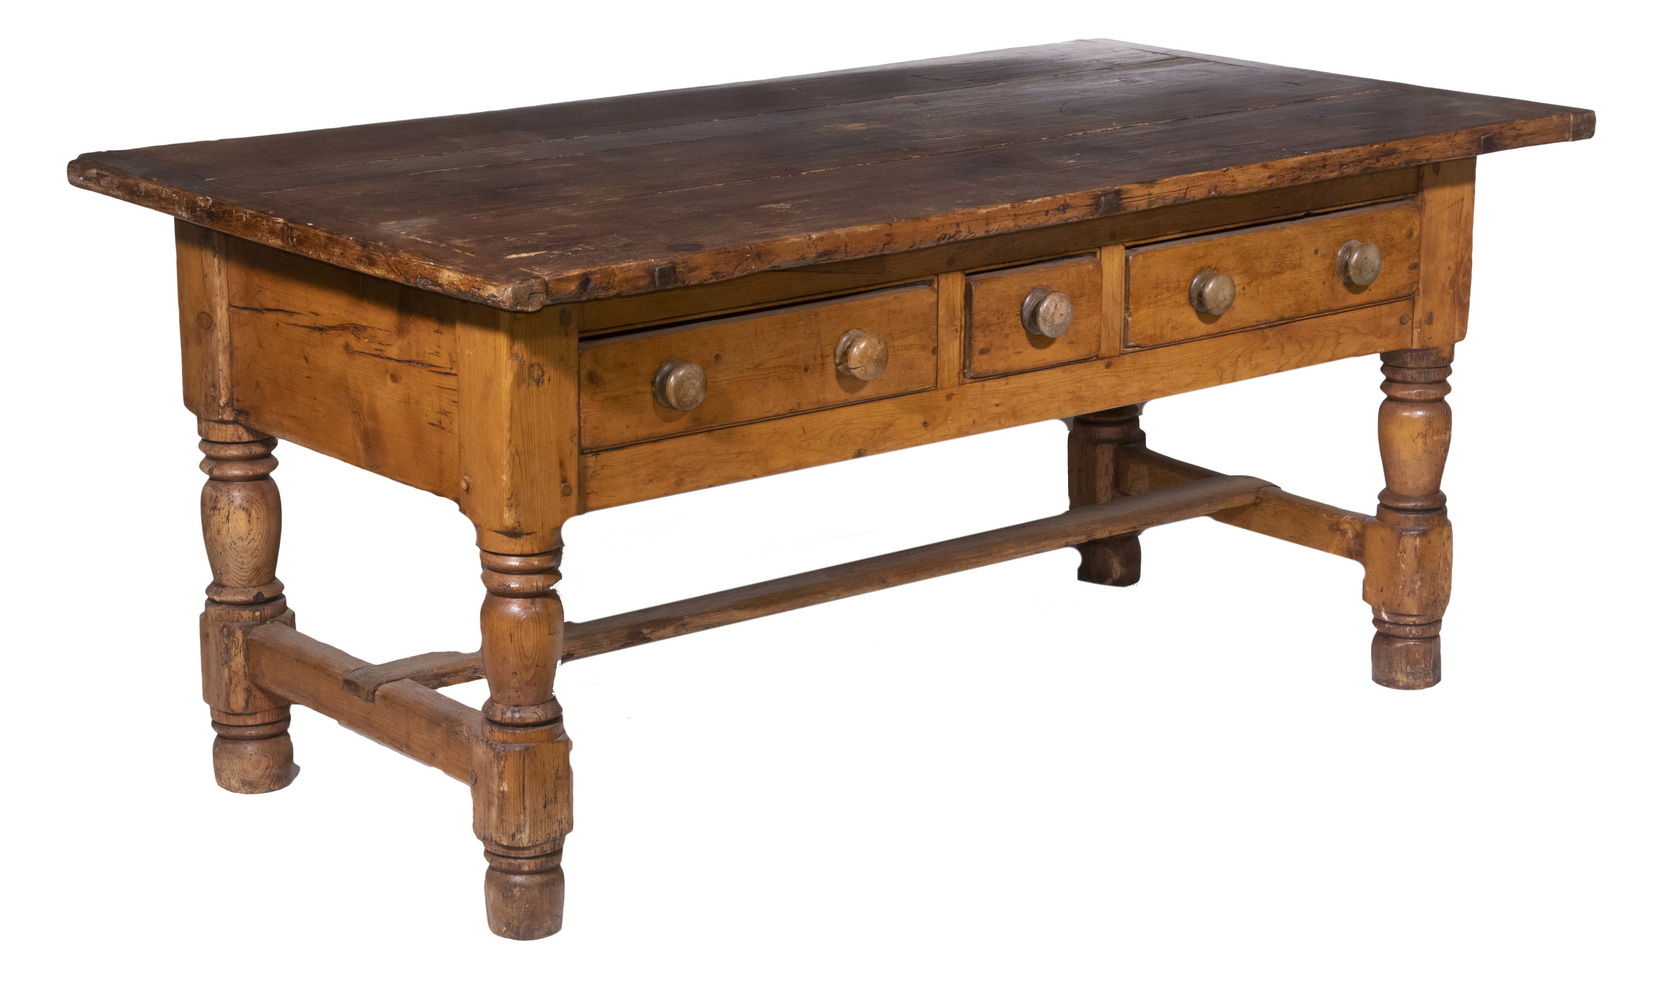 EARLY PINE WORK TABLE 18th c Heavy 2b1a91